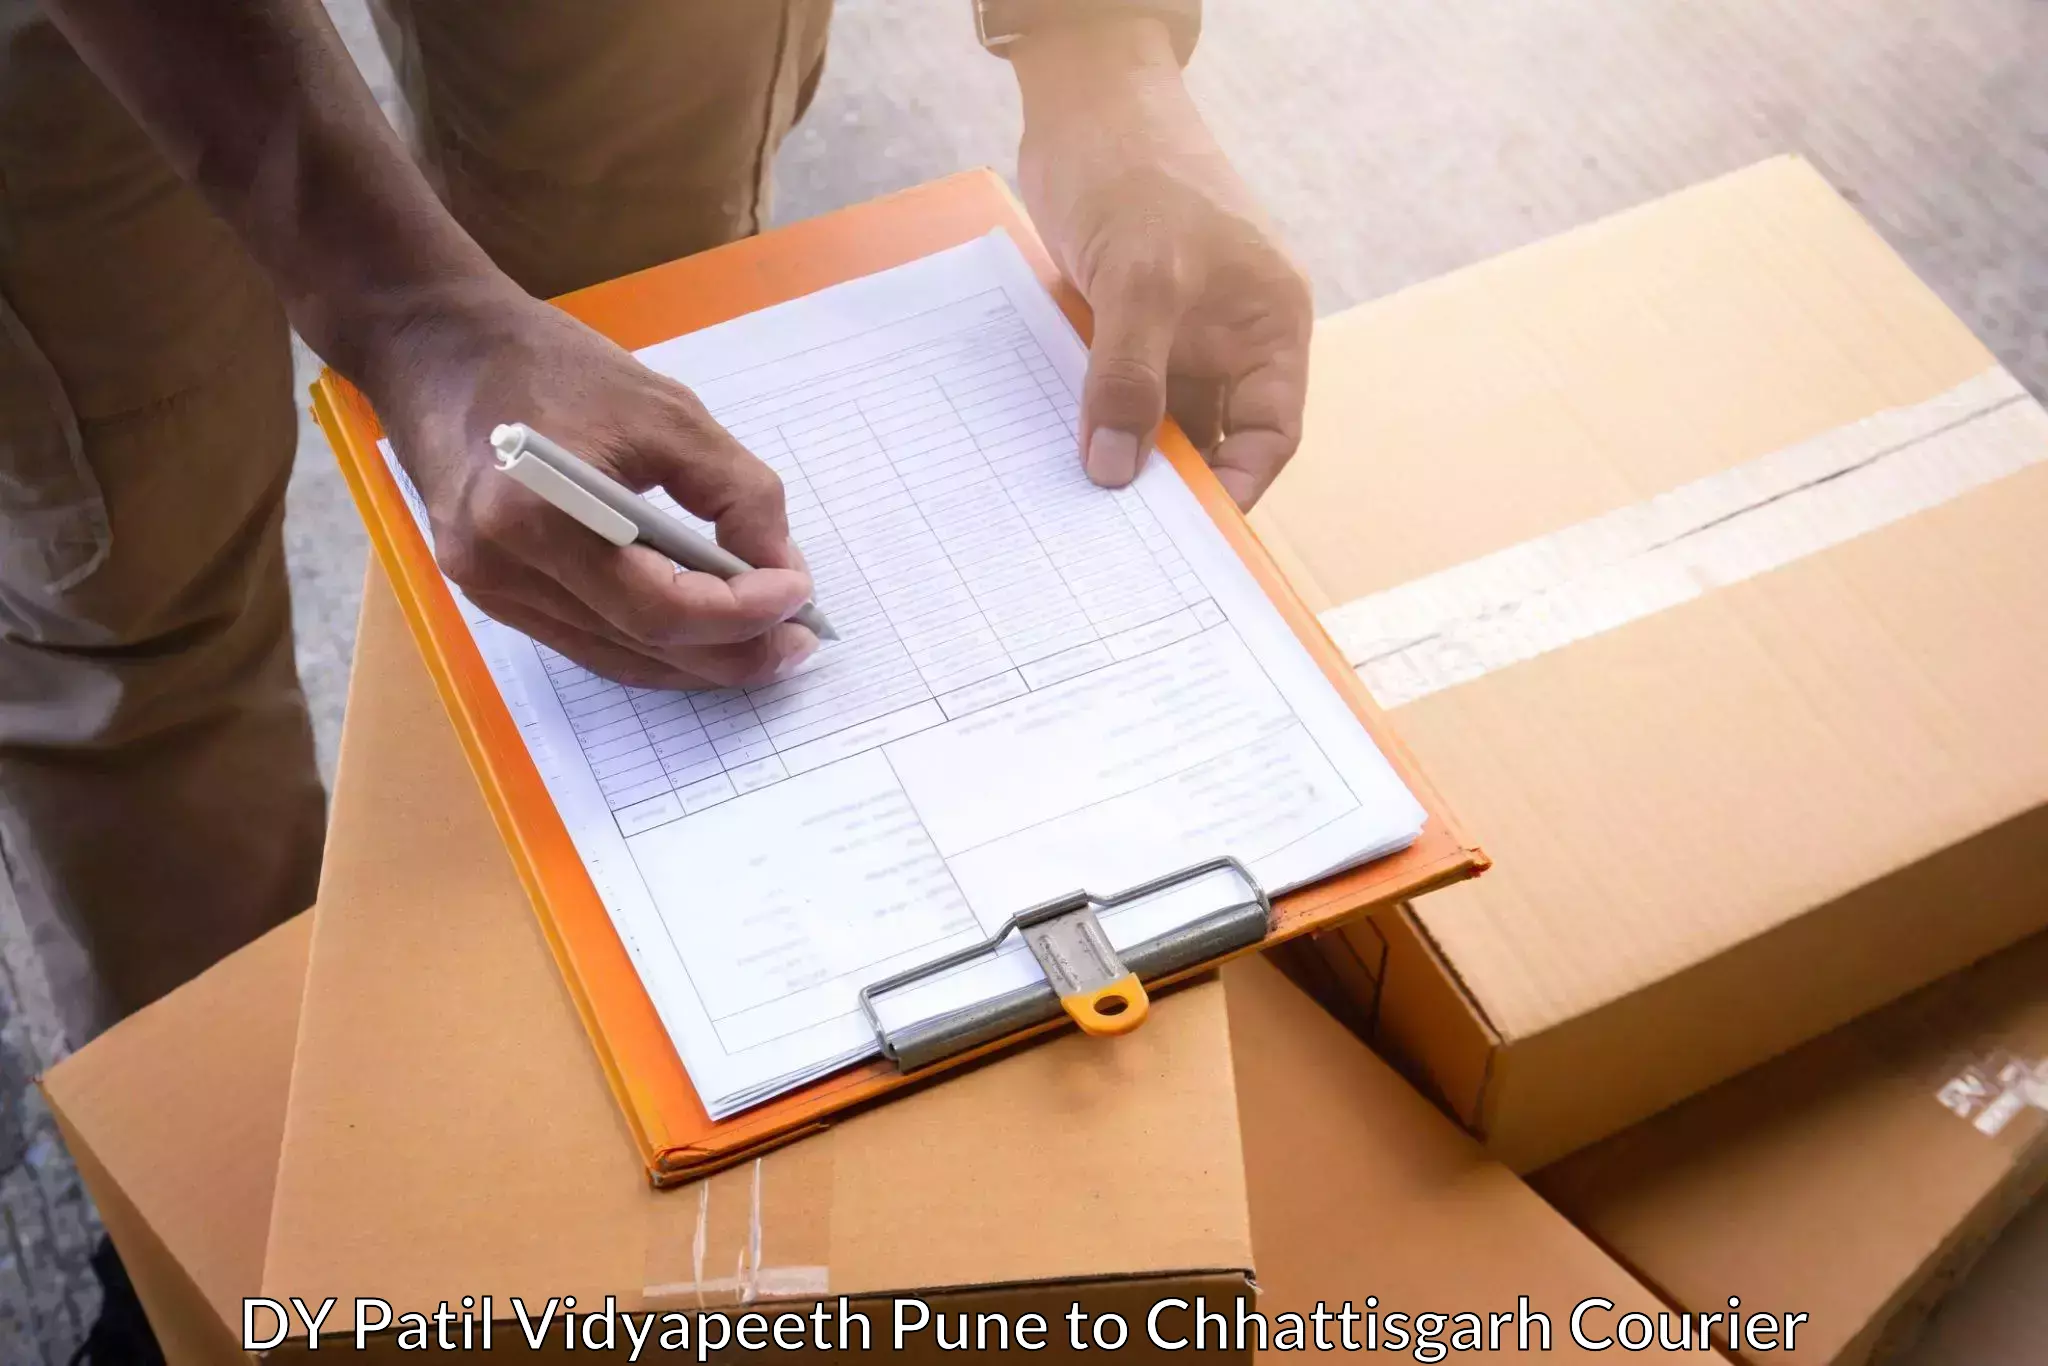 Fast delivery service DY Patil Vidyapeeth Pune to Premnagar